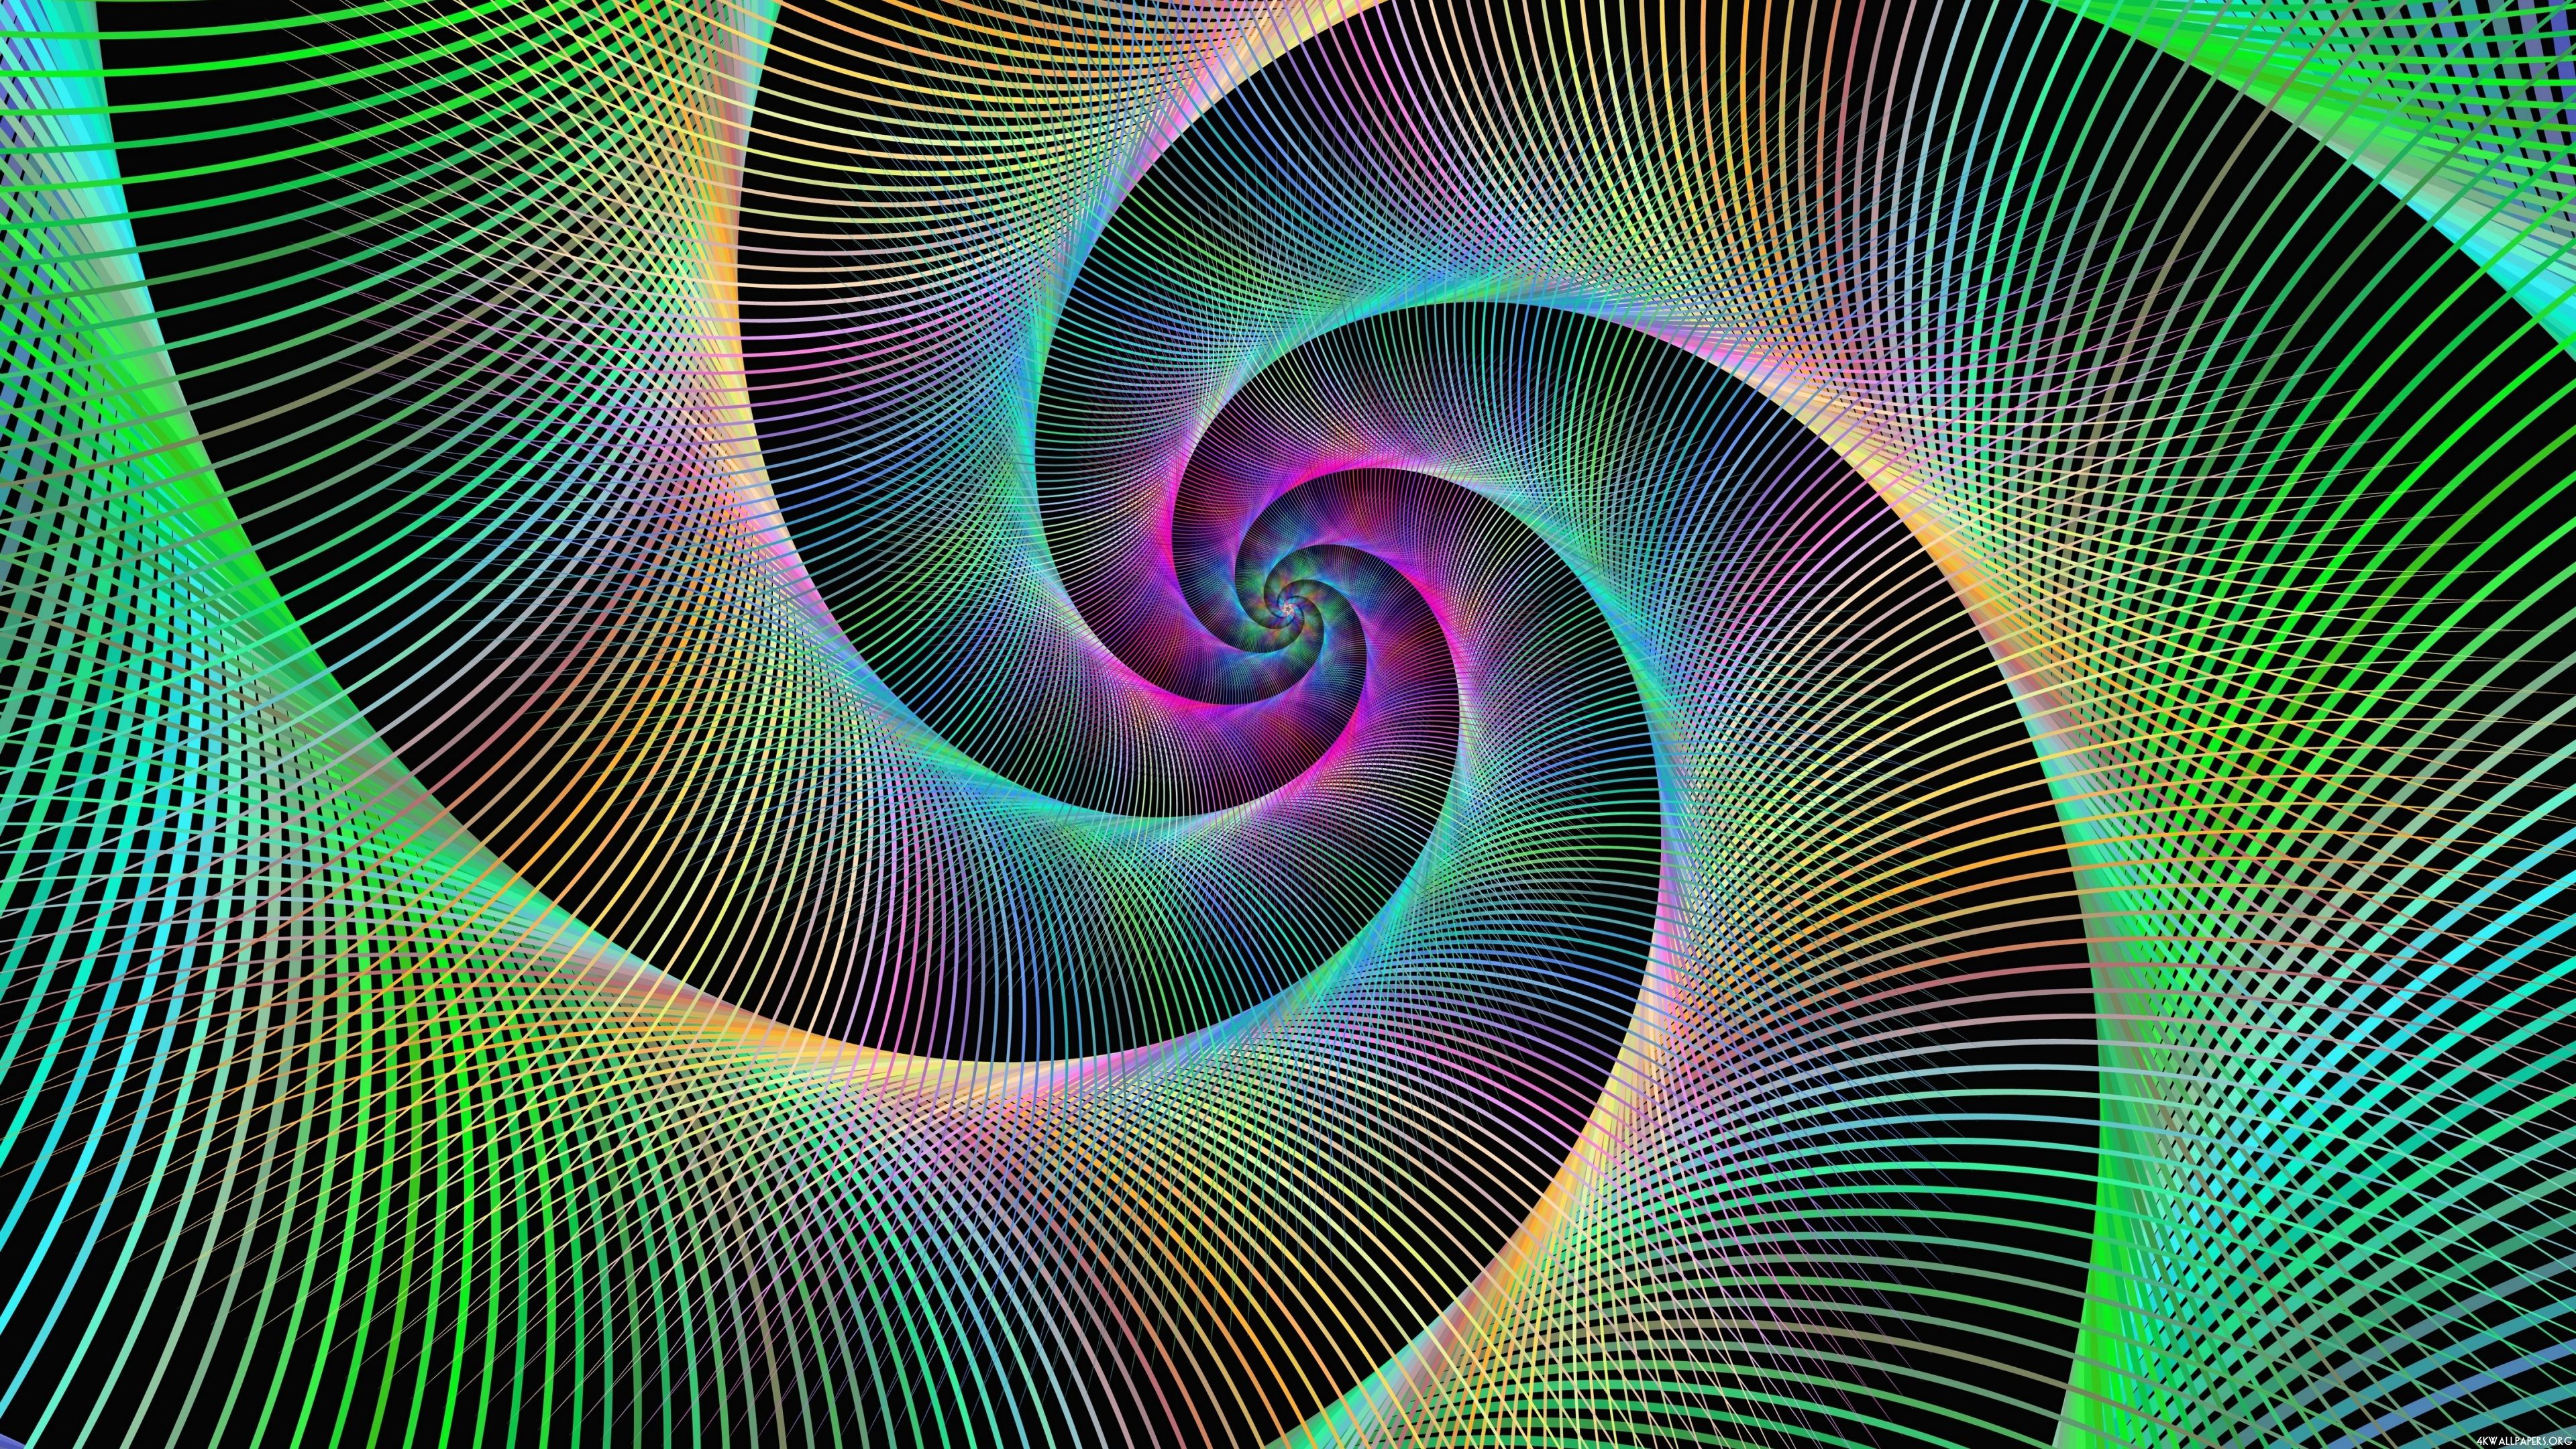 Trippy Fractal wallpaper | Patterns or Abstract | Pinterest ...